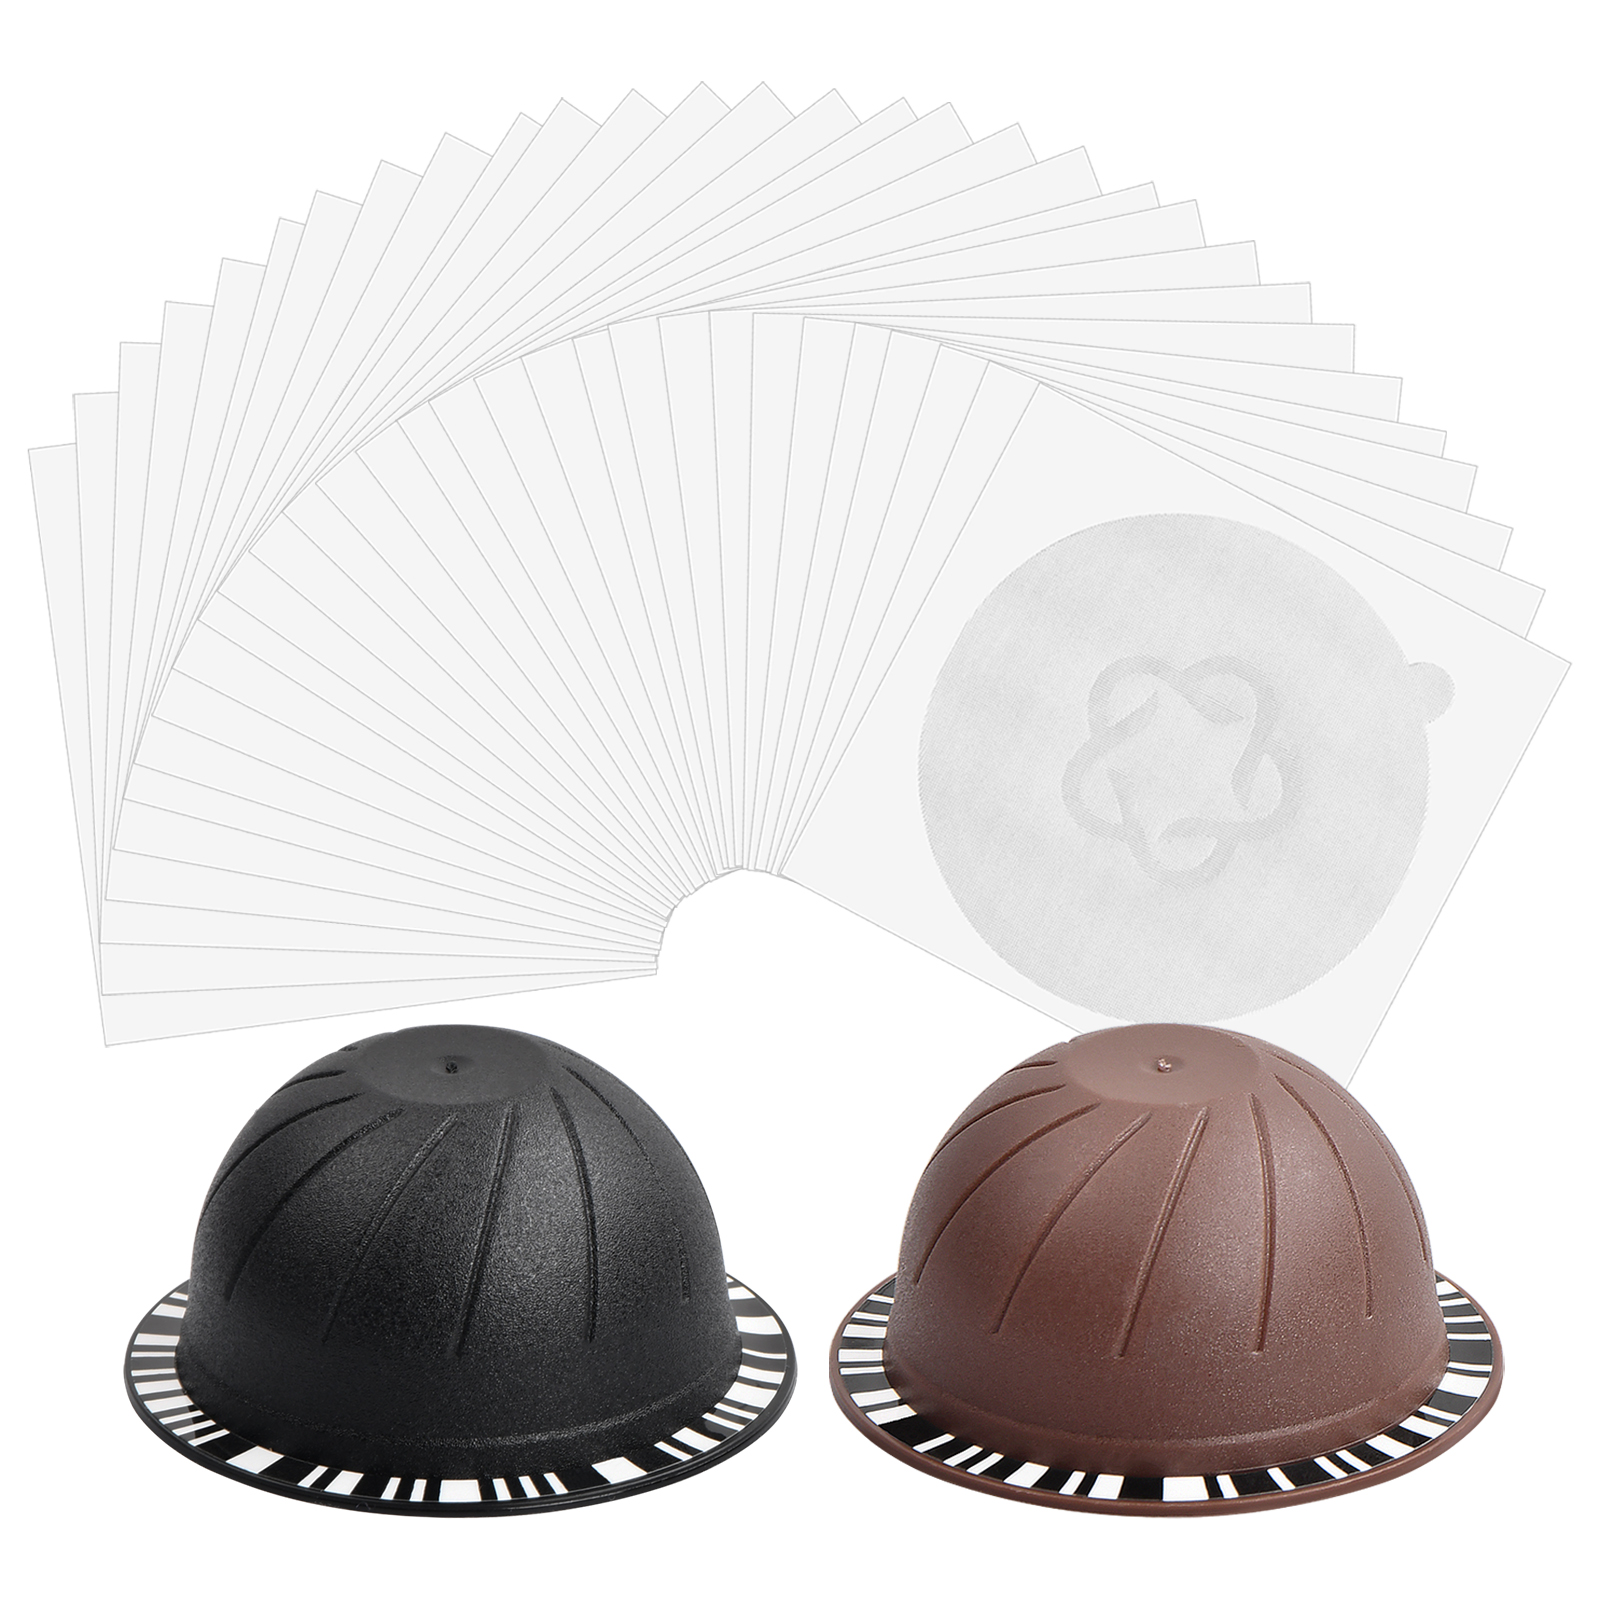 2pcs Refillable Vertuo Pods - 230ml & 150ml Reusable Coffee Capsules with  Disposable Aluminum Foil Seals - Perfect for Nespresso Vertuo Machines - Enj